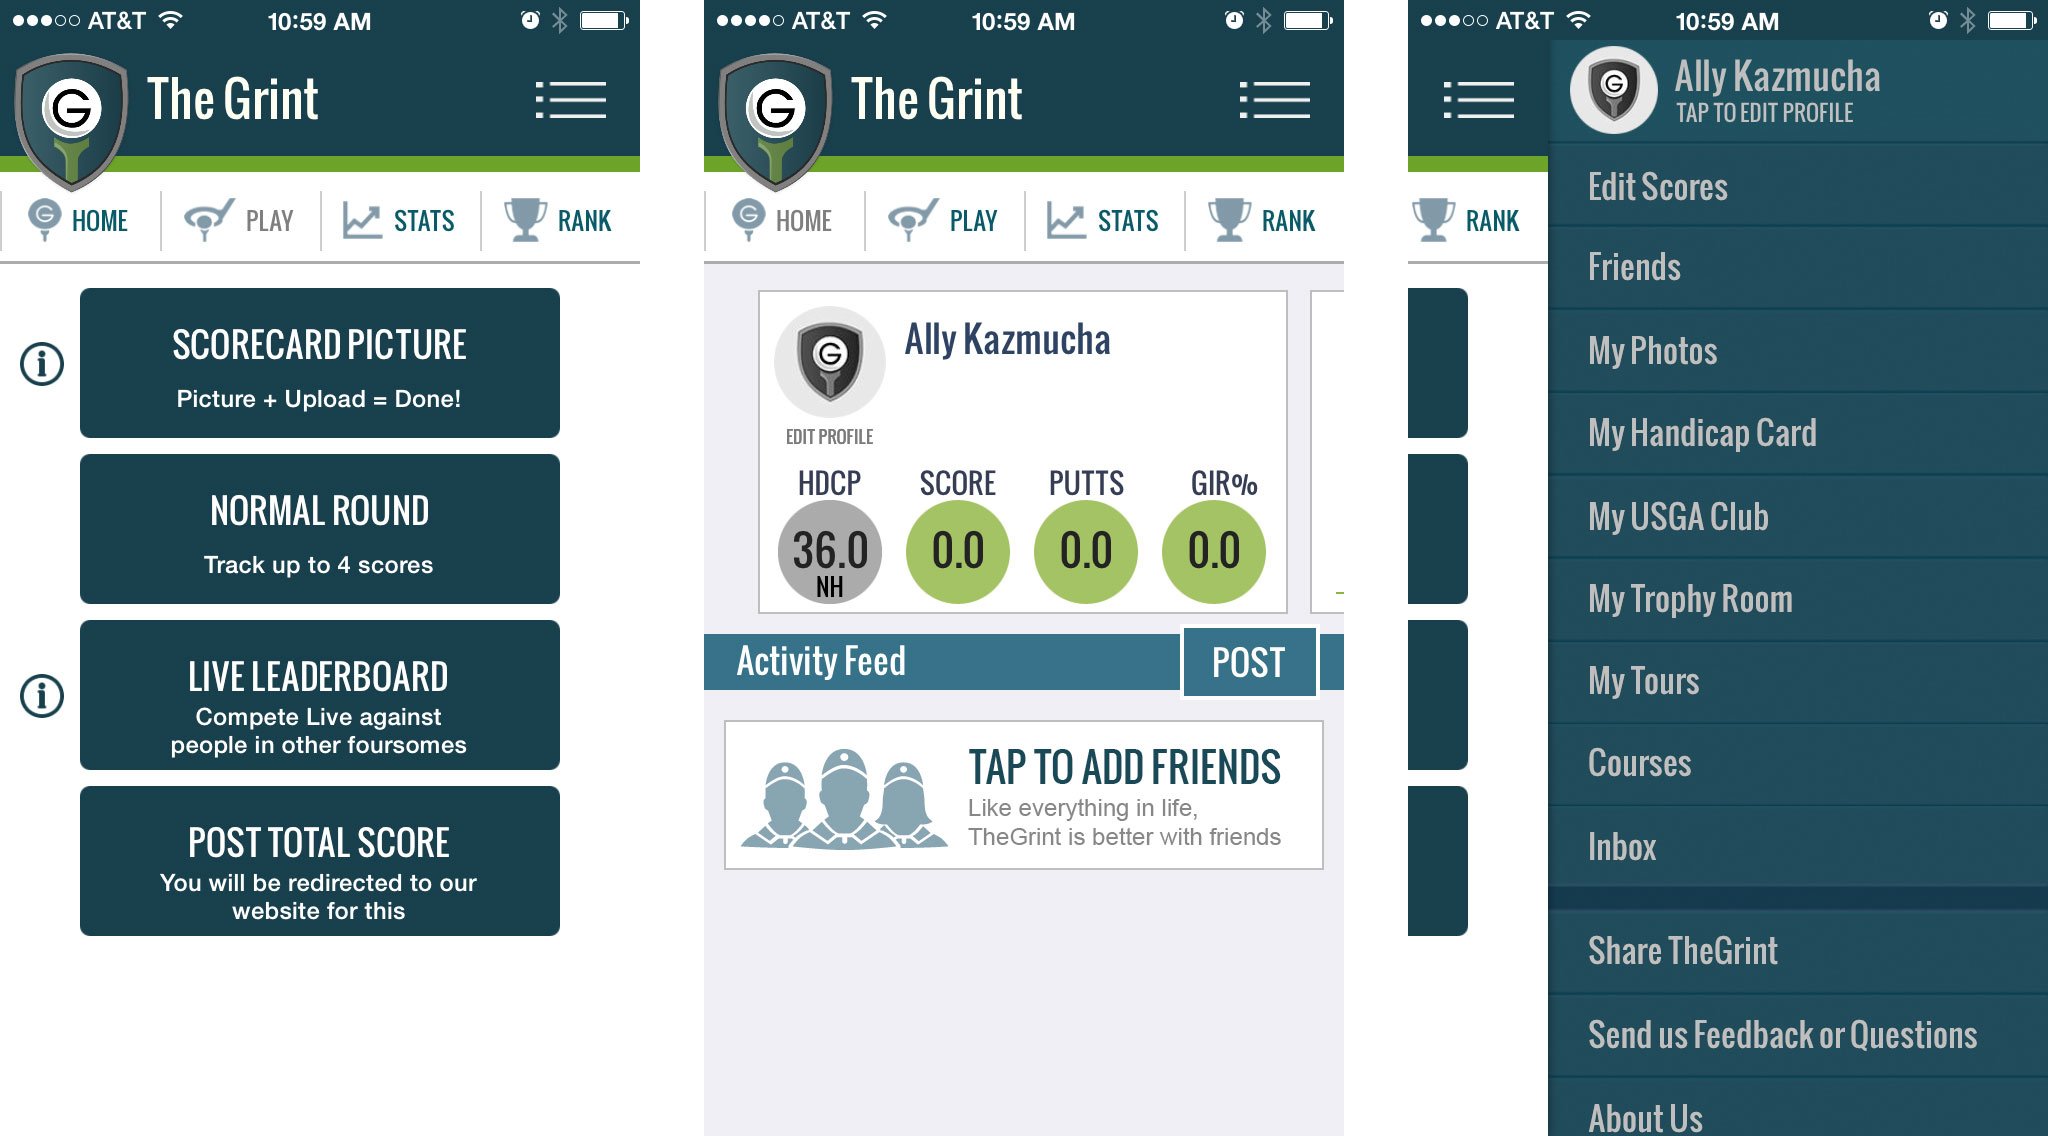 Best golfing apps for iPhone: TheGrint